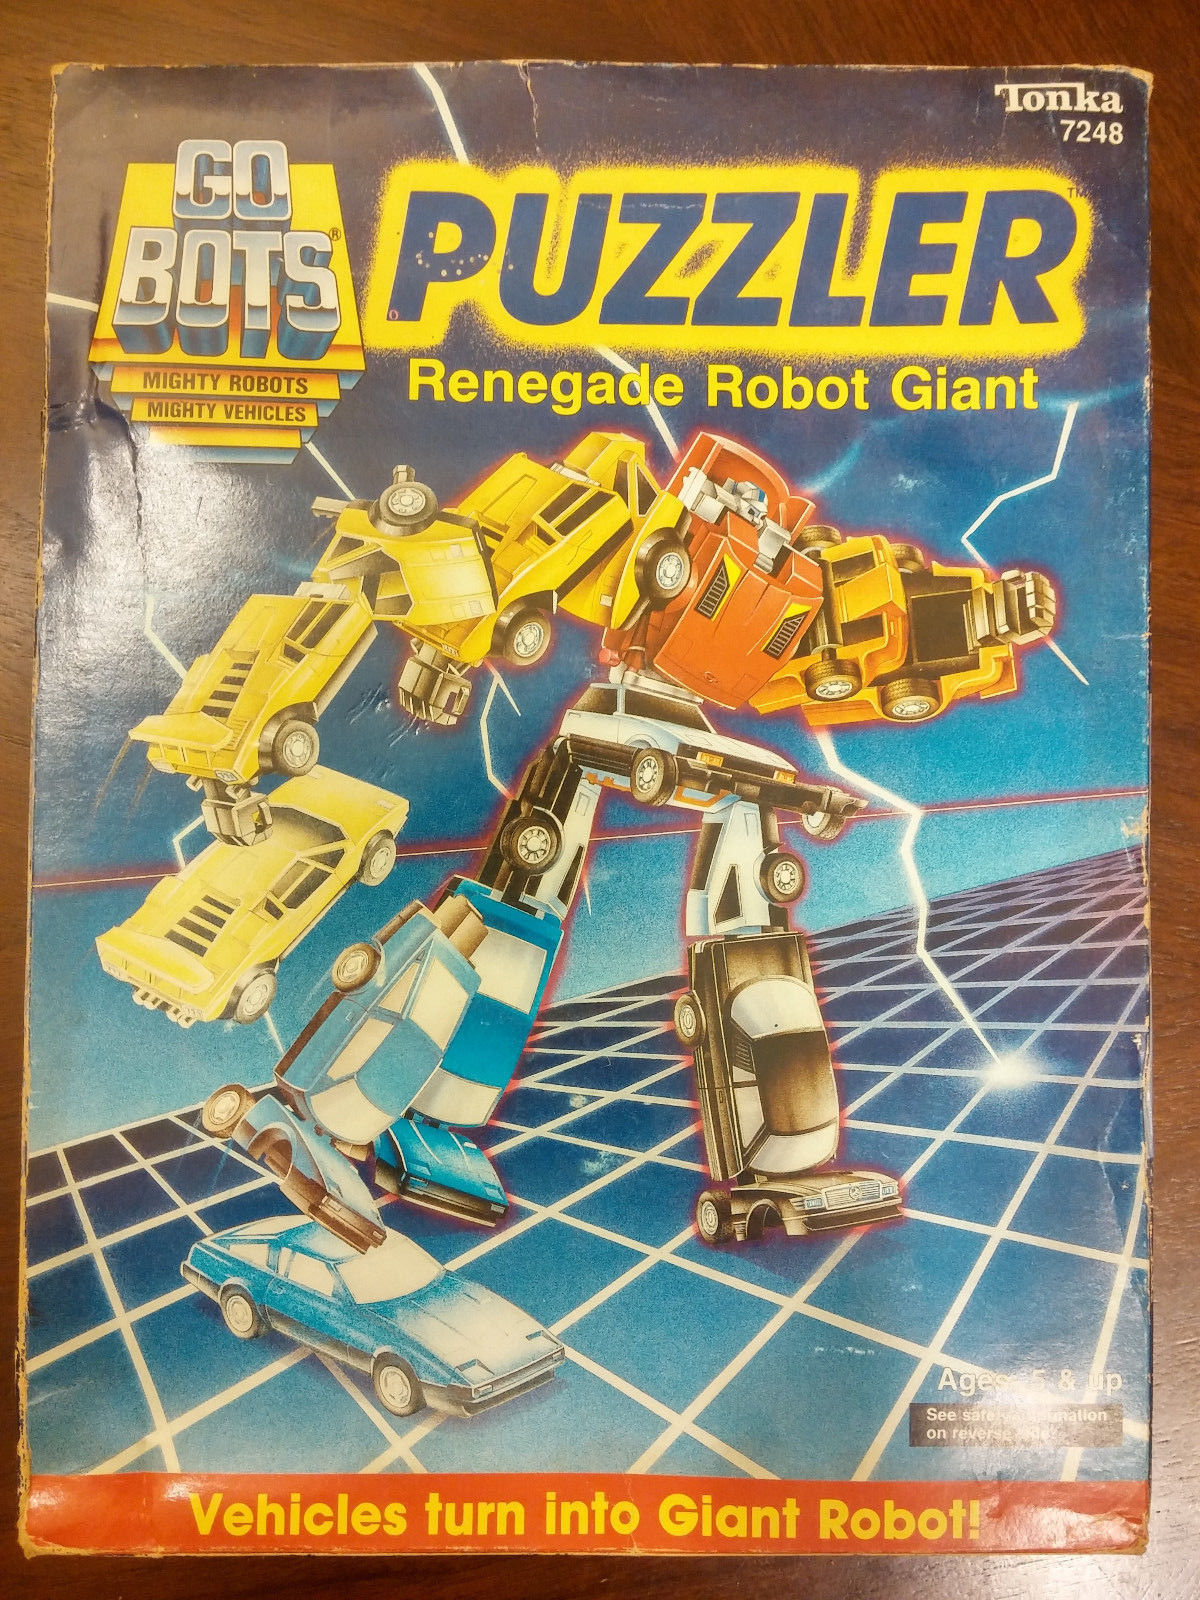 Puzzler-boxed.jpg